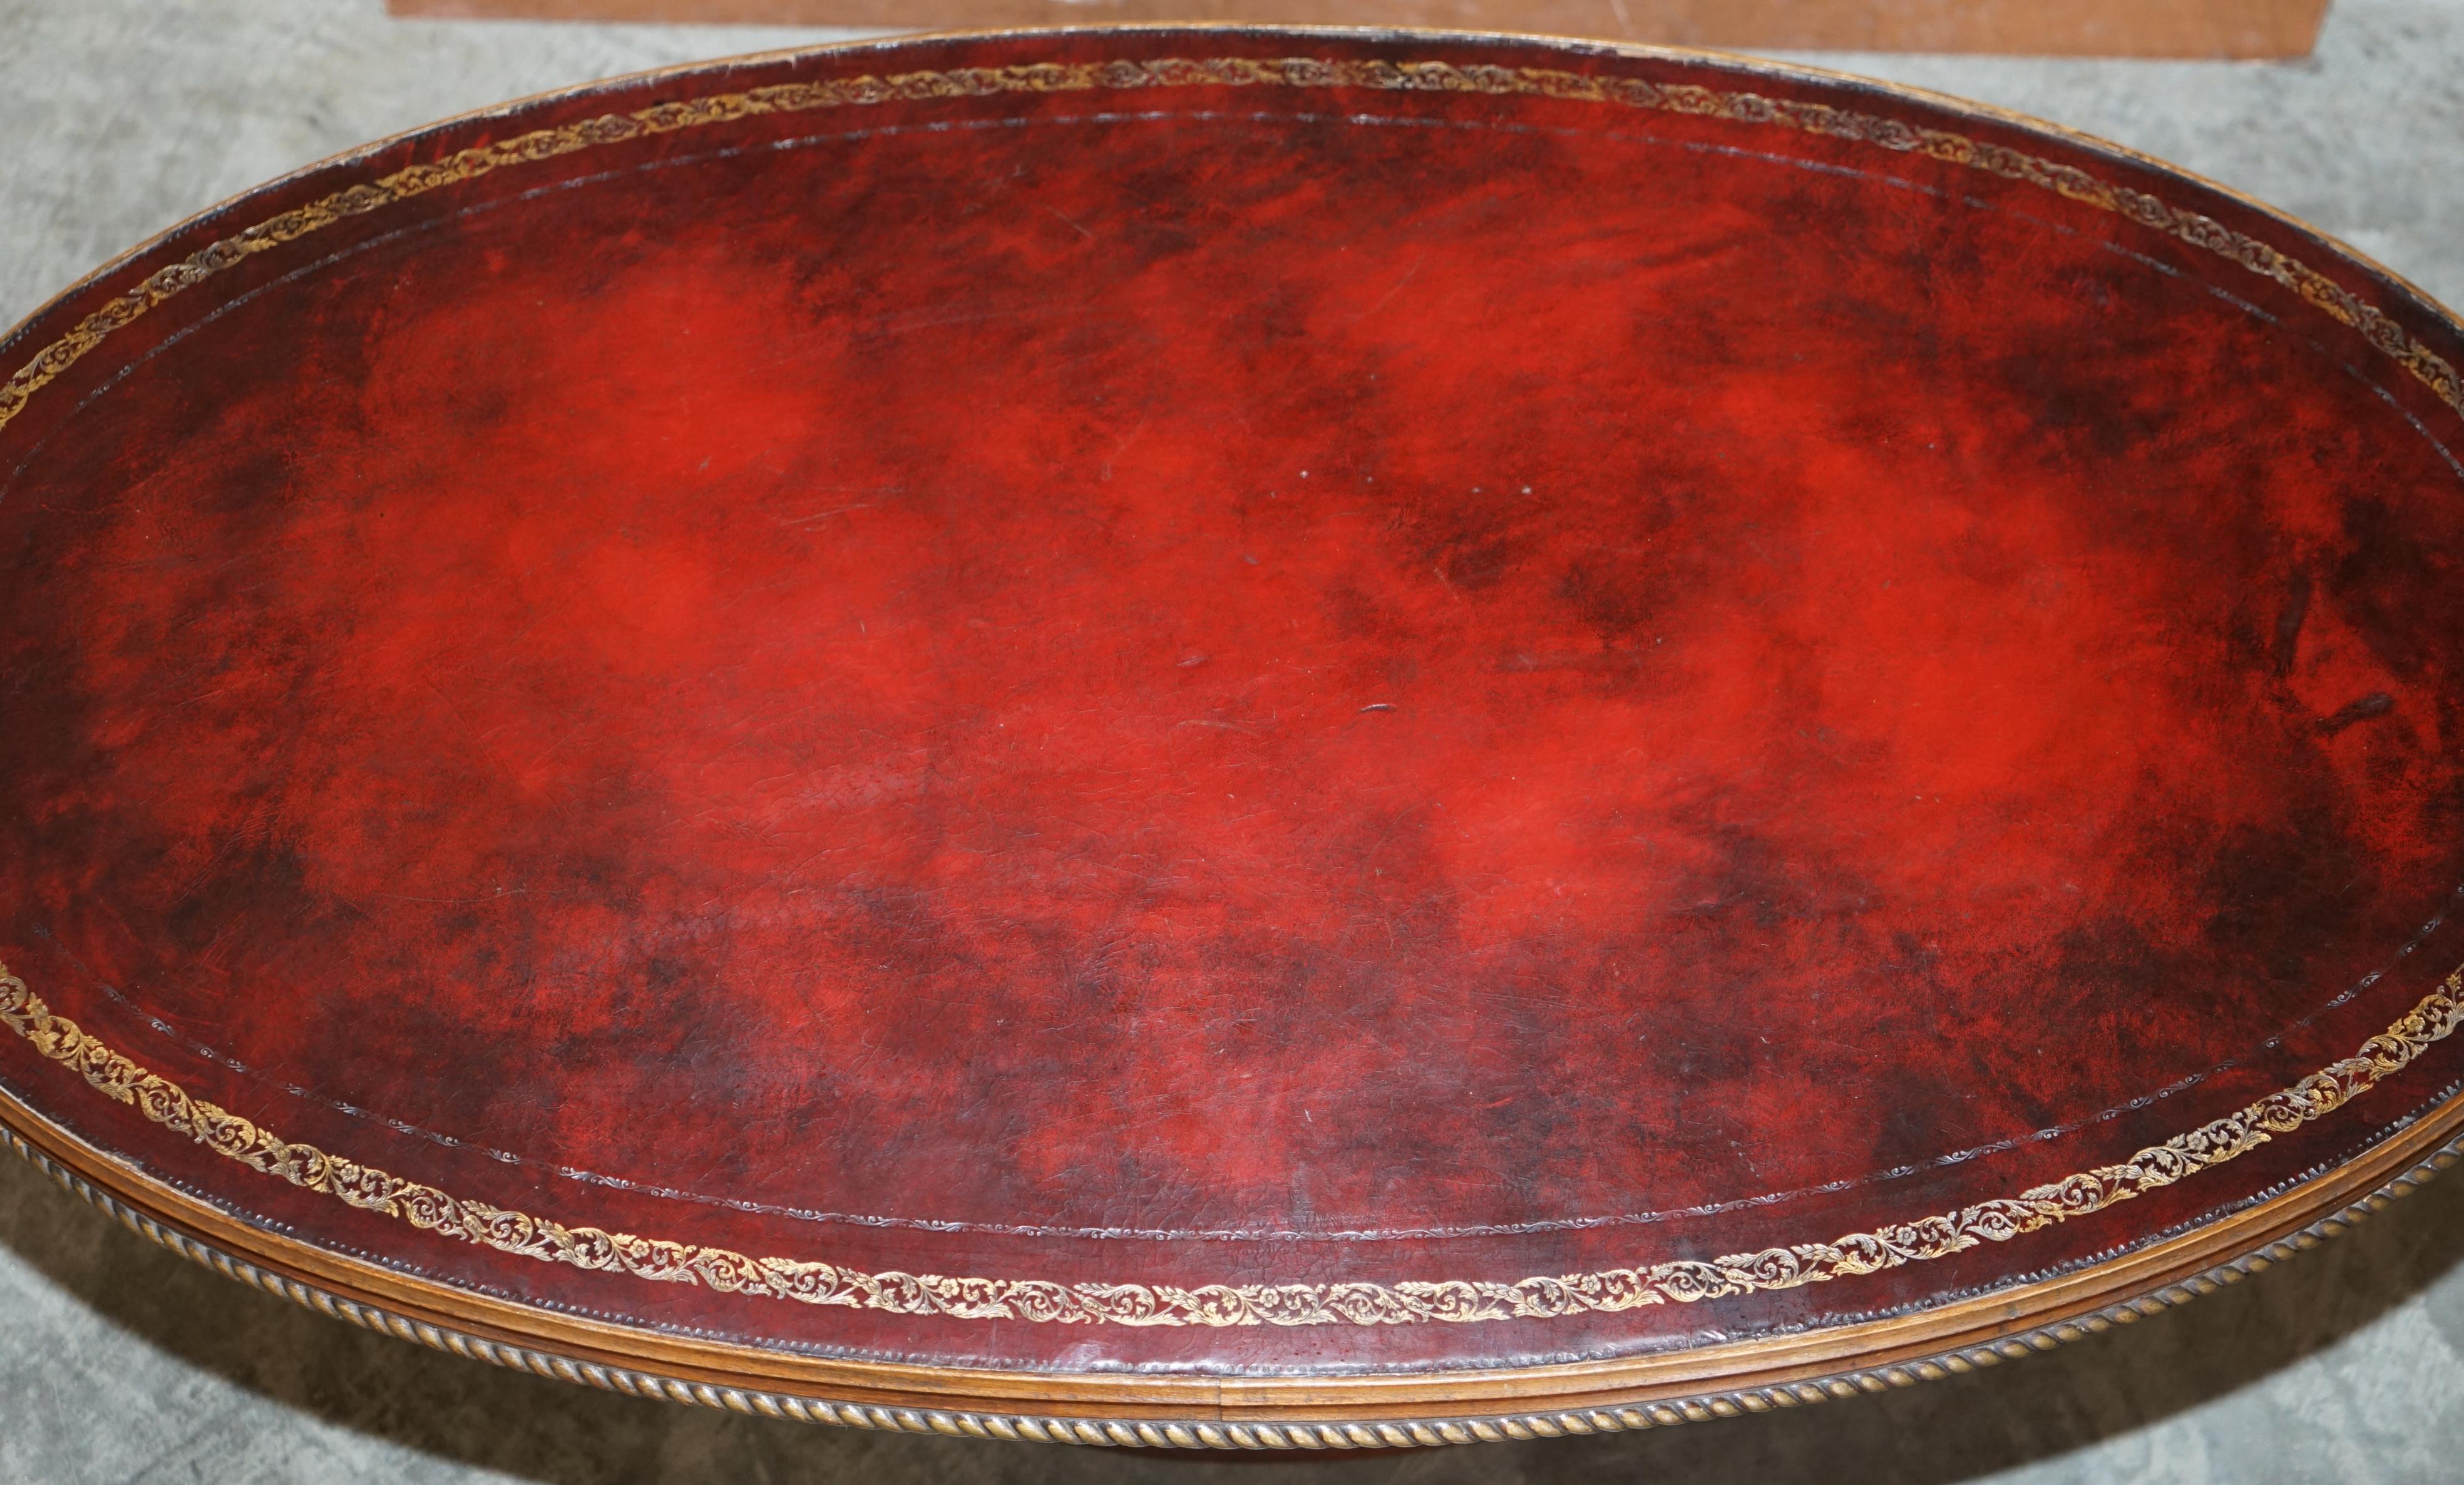 20th Century Oxblood Leather Oval Roman Pedestal Base Coffee or Cocktail Table Nice Find